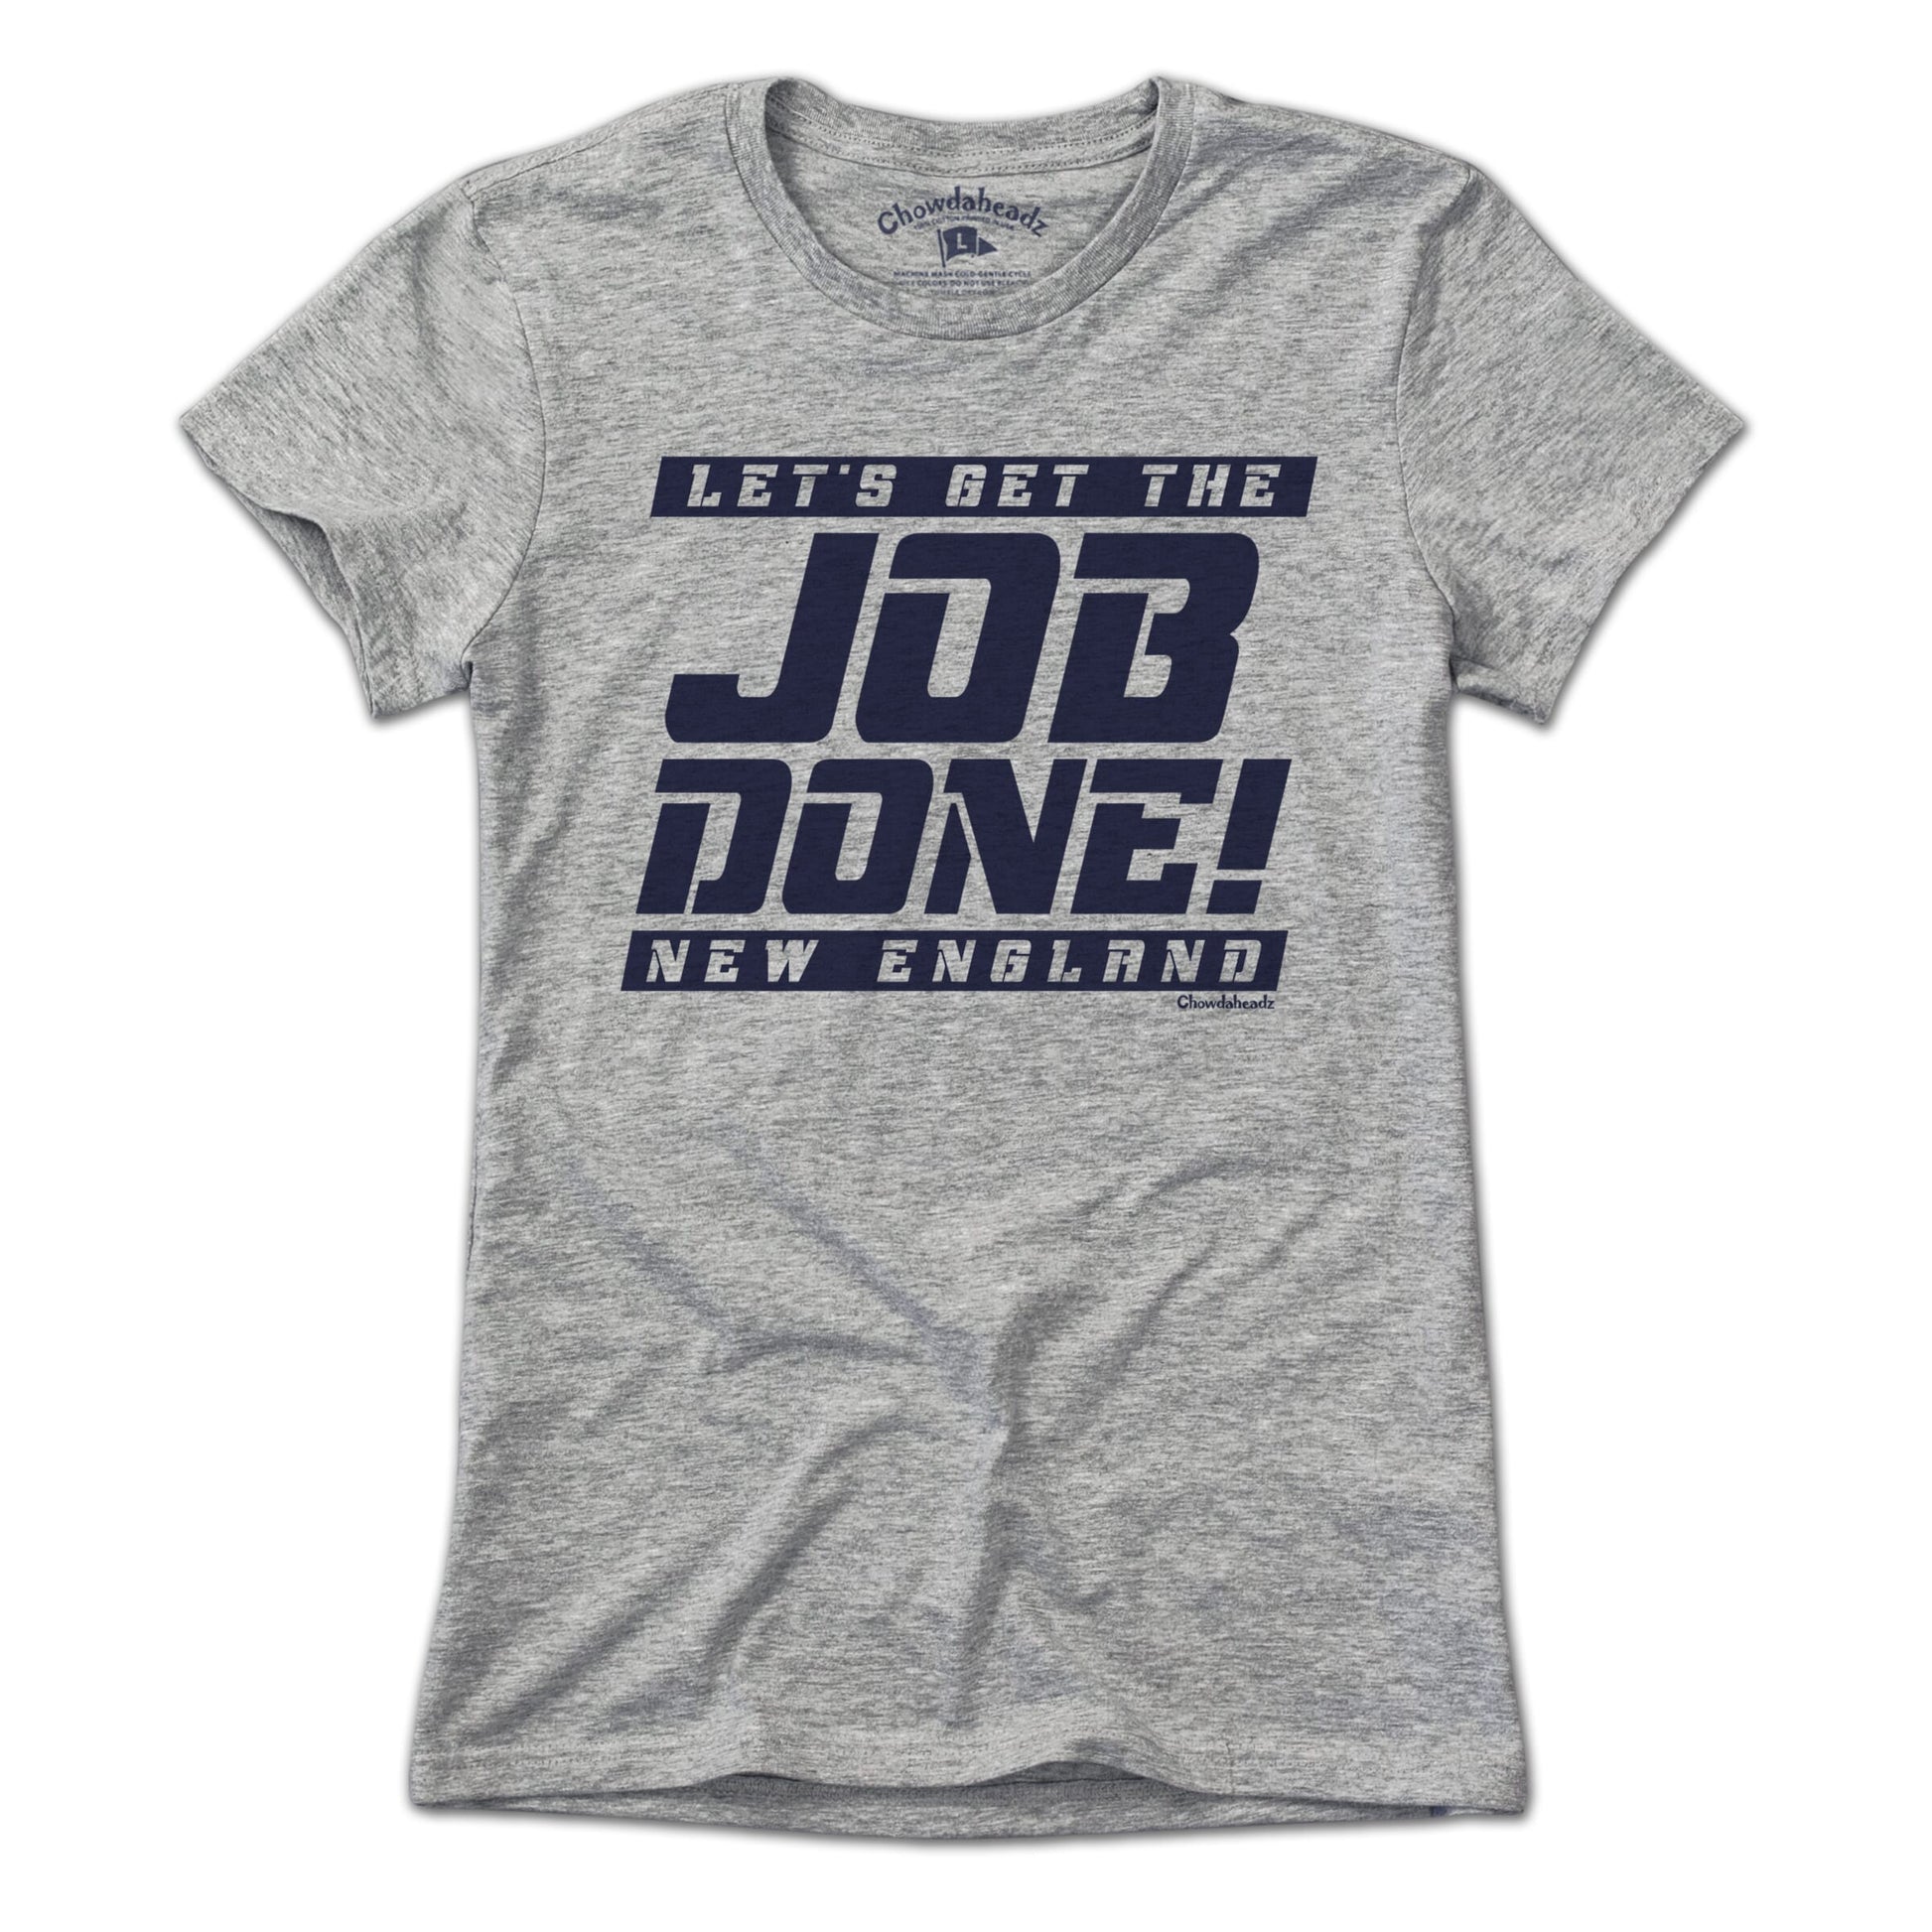 Let's Get the Job Done New England T-Shirt - Chowdaheadz